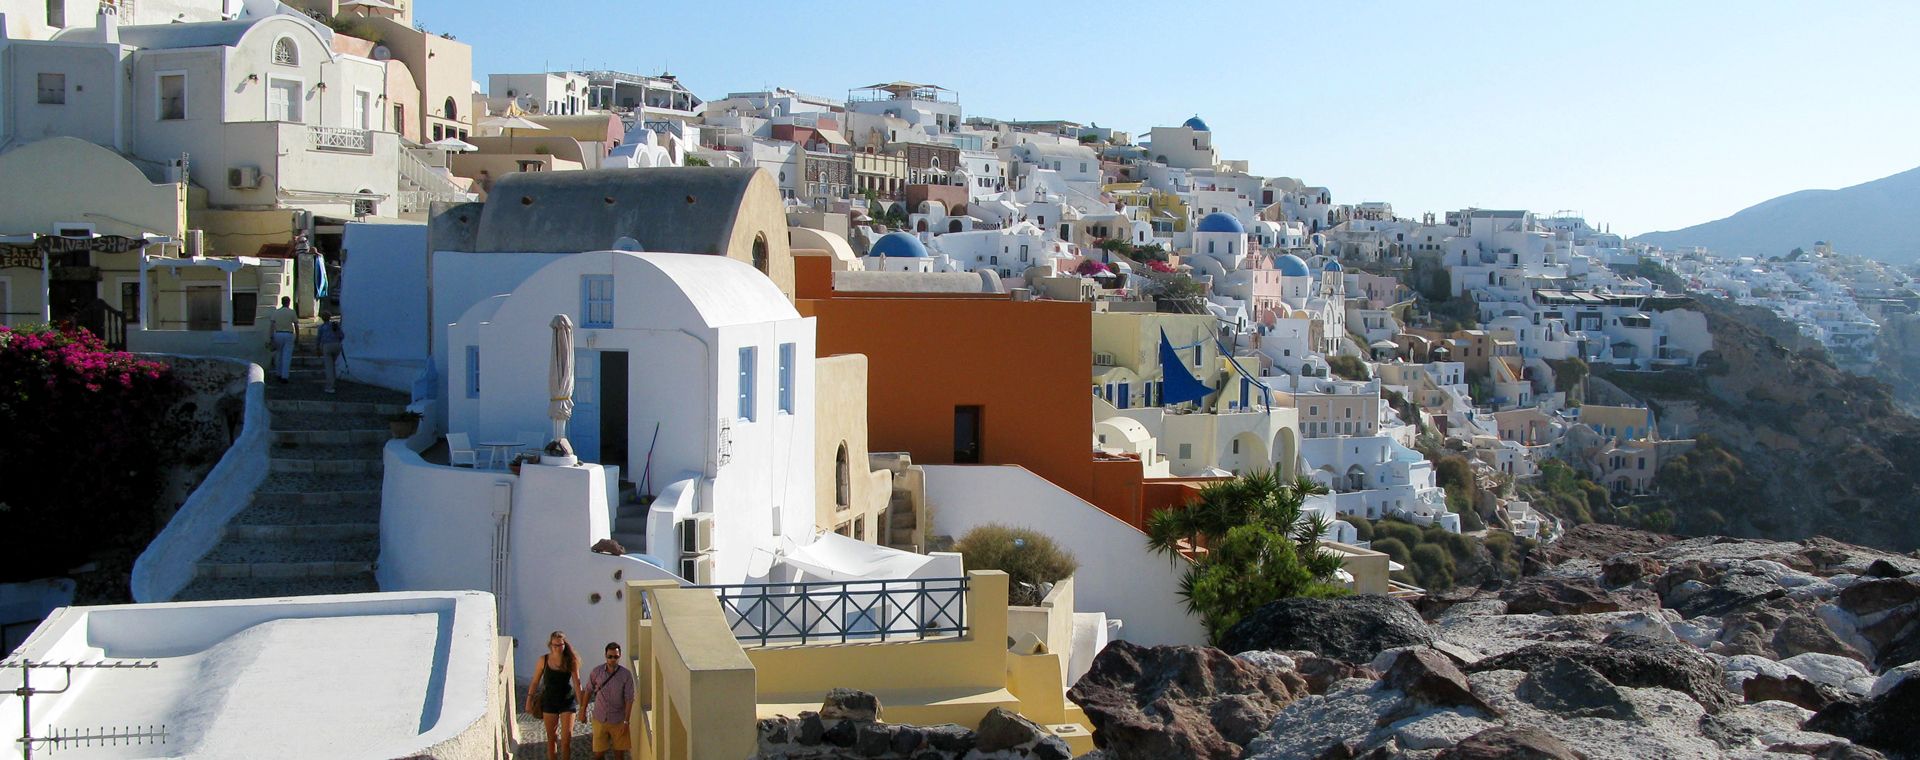 Oia village in the morning